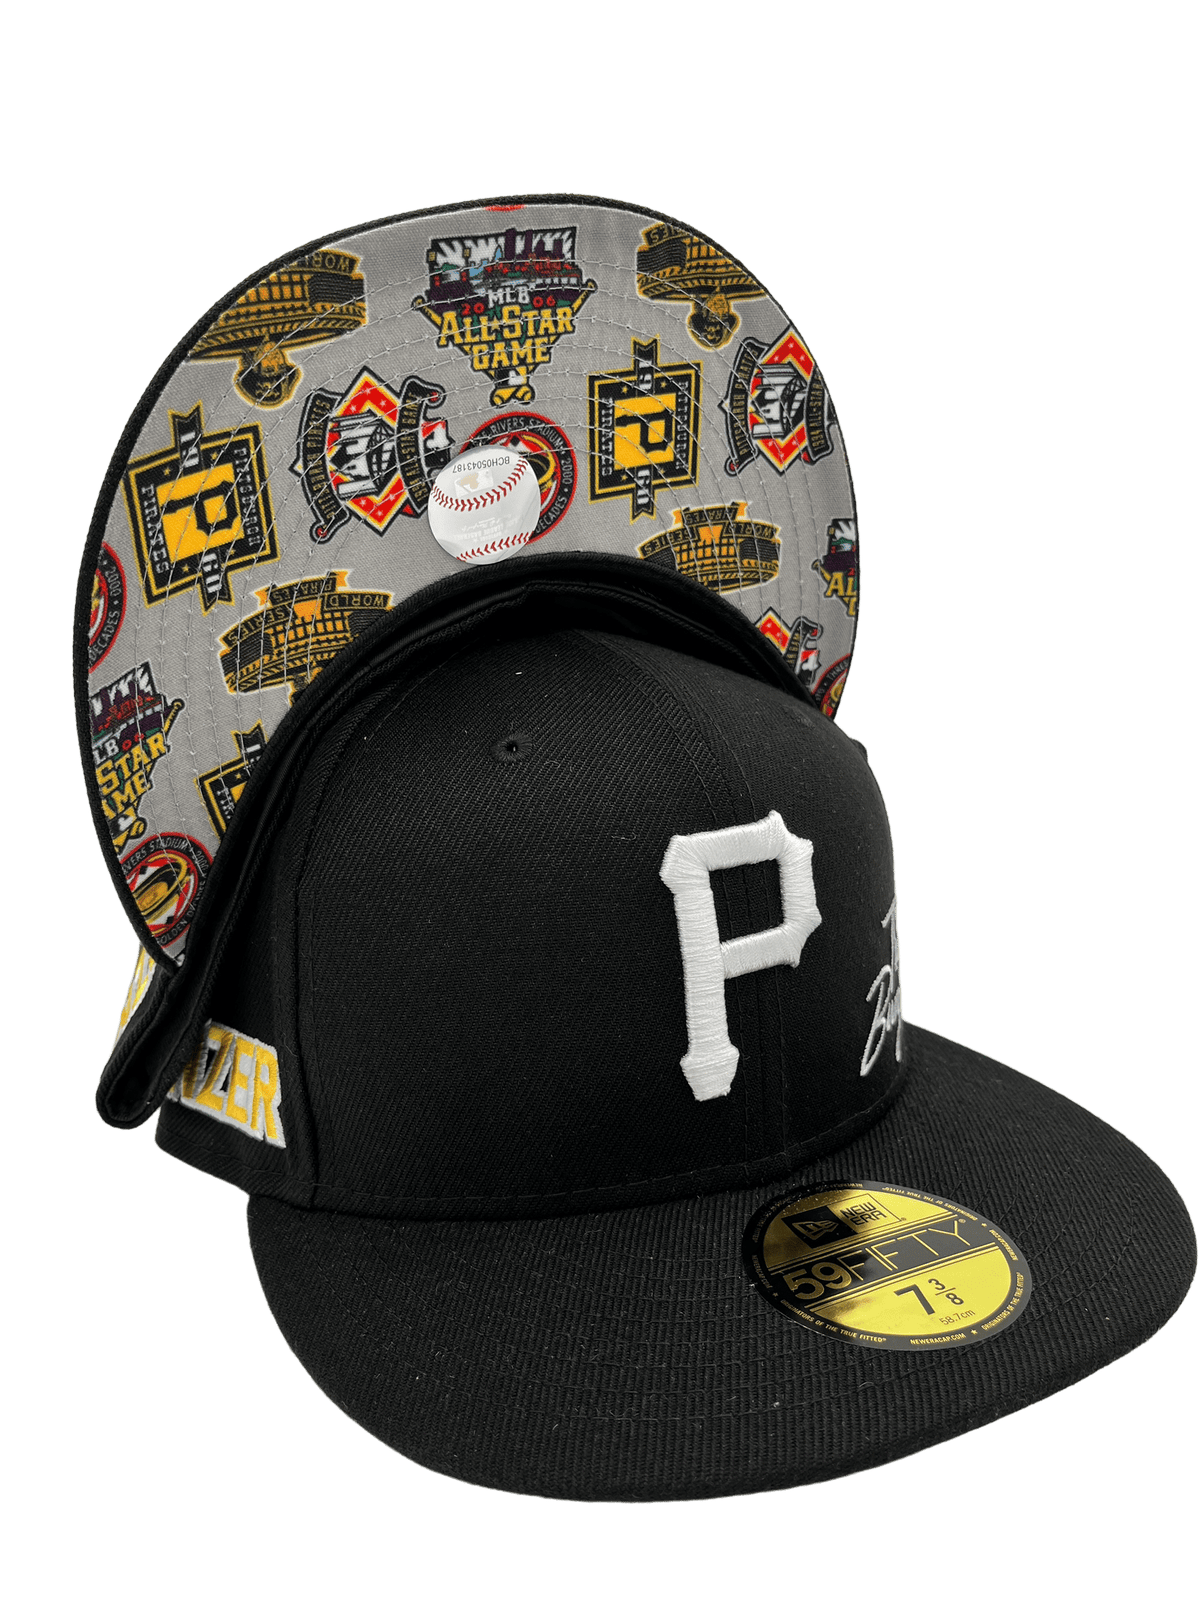 Pittsburgh Pirates New Era Alternate Logo 59FIFTY Fitted Hat - Gold